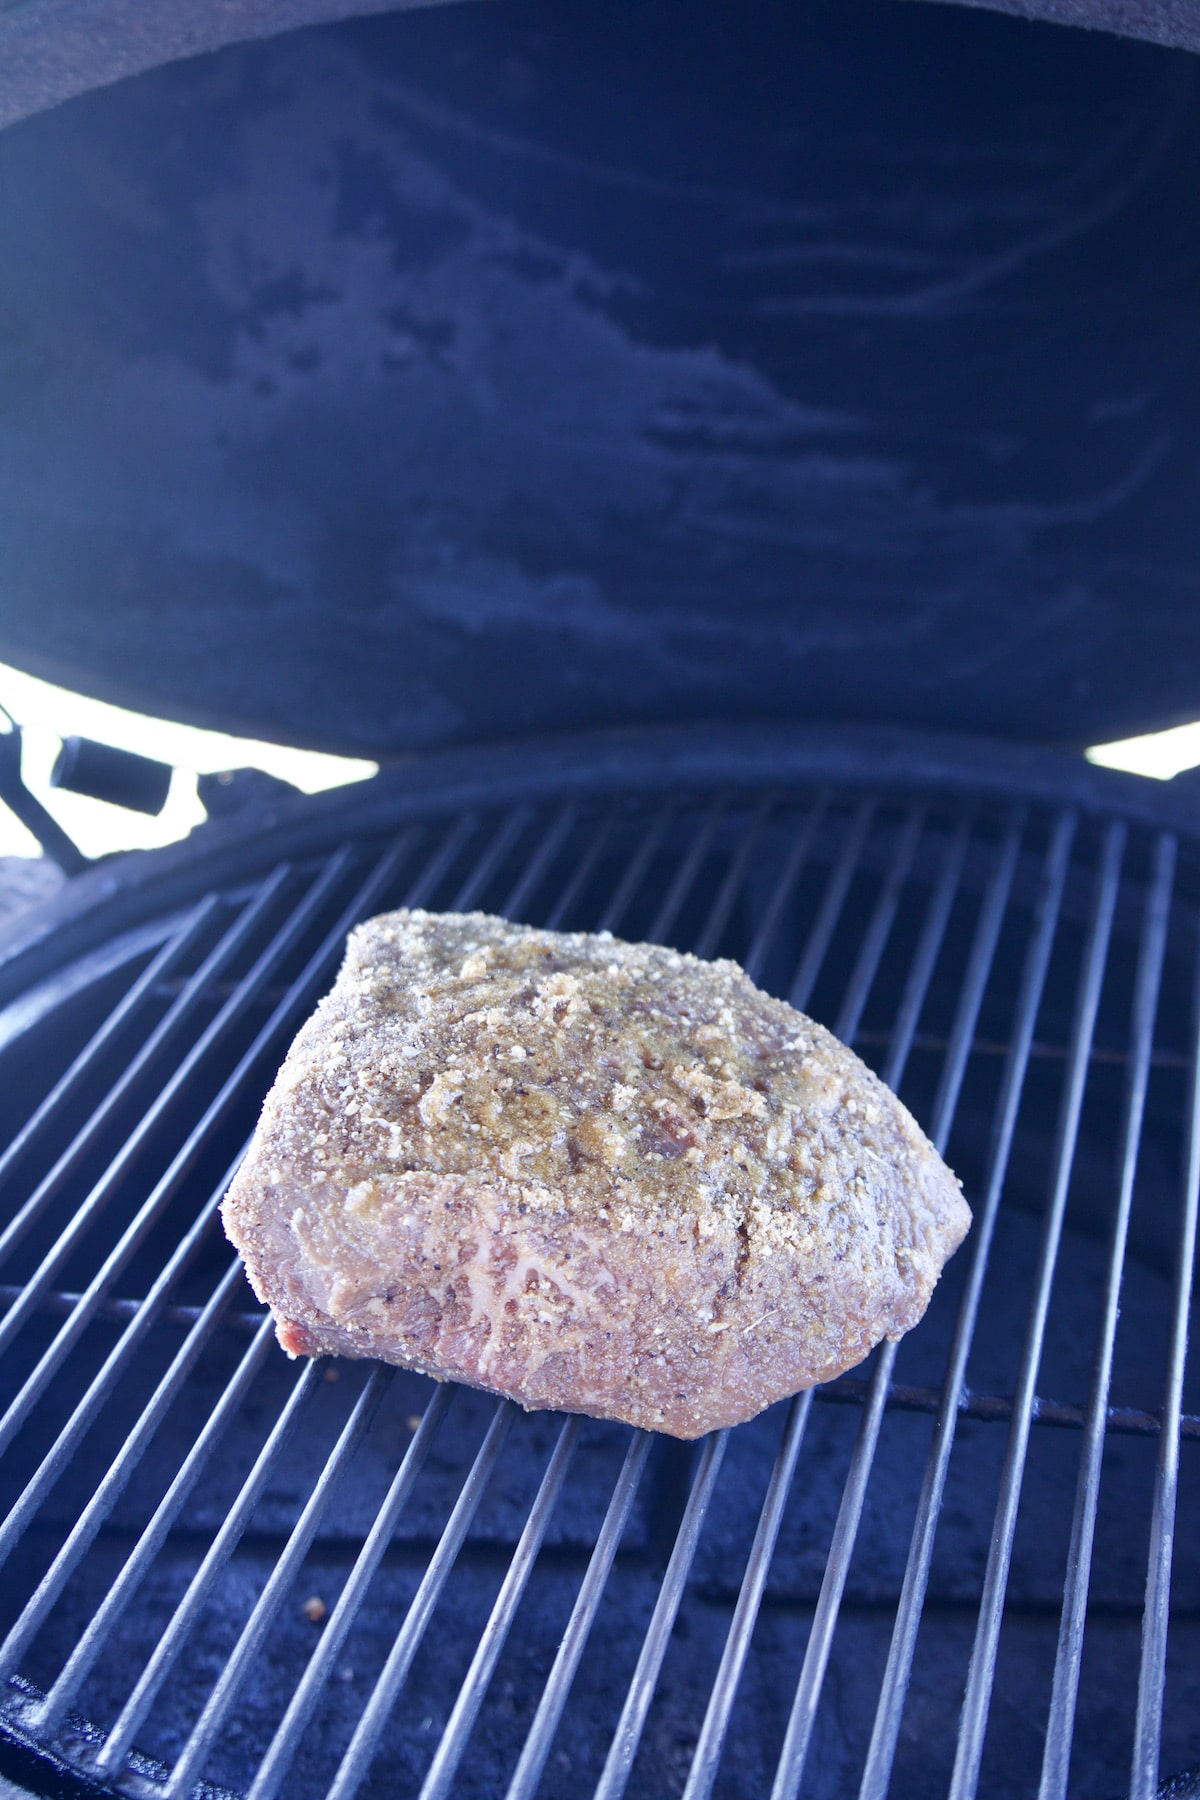 Grilling a bottom round roast.